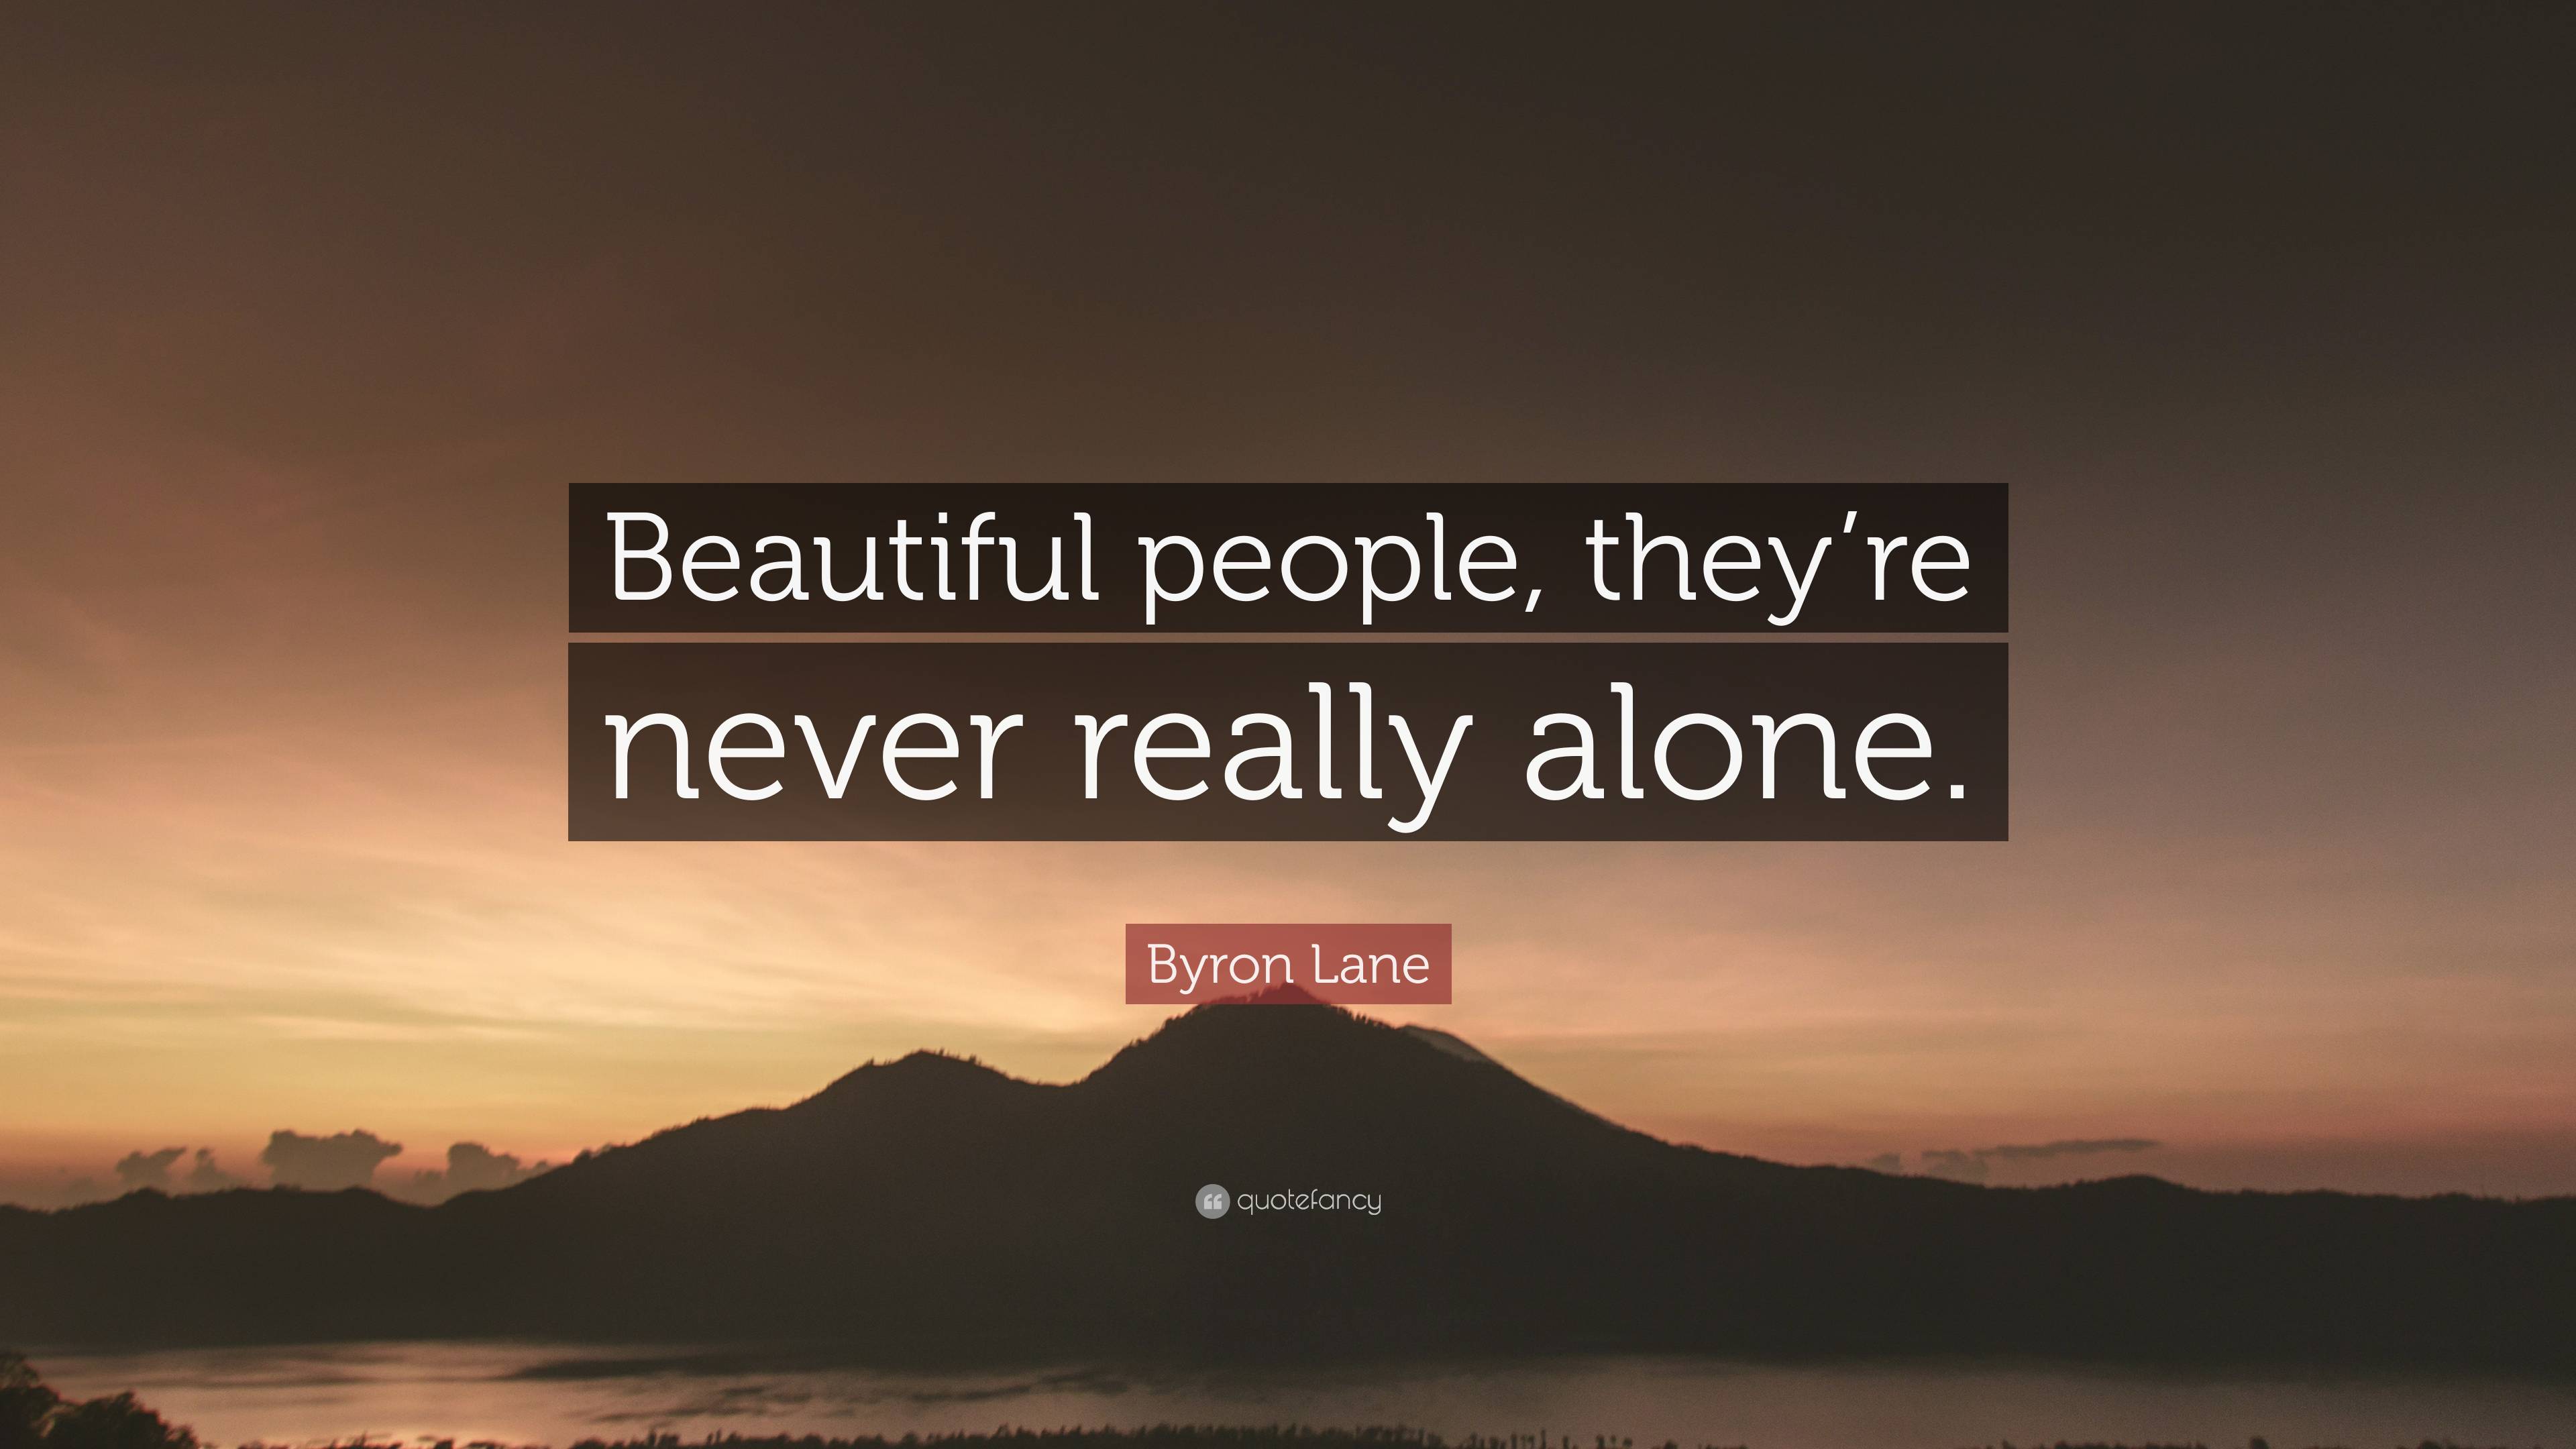 Byron Lane Quote: “Beautiful people, they’re never really alone.”